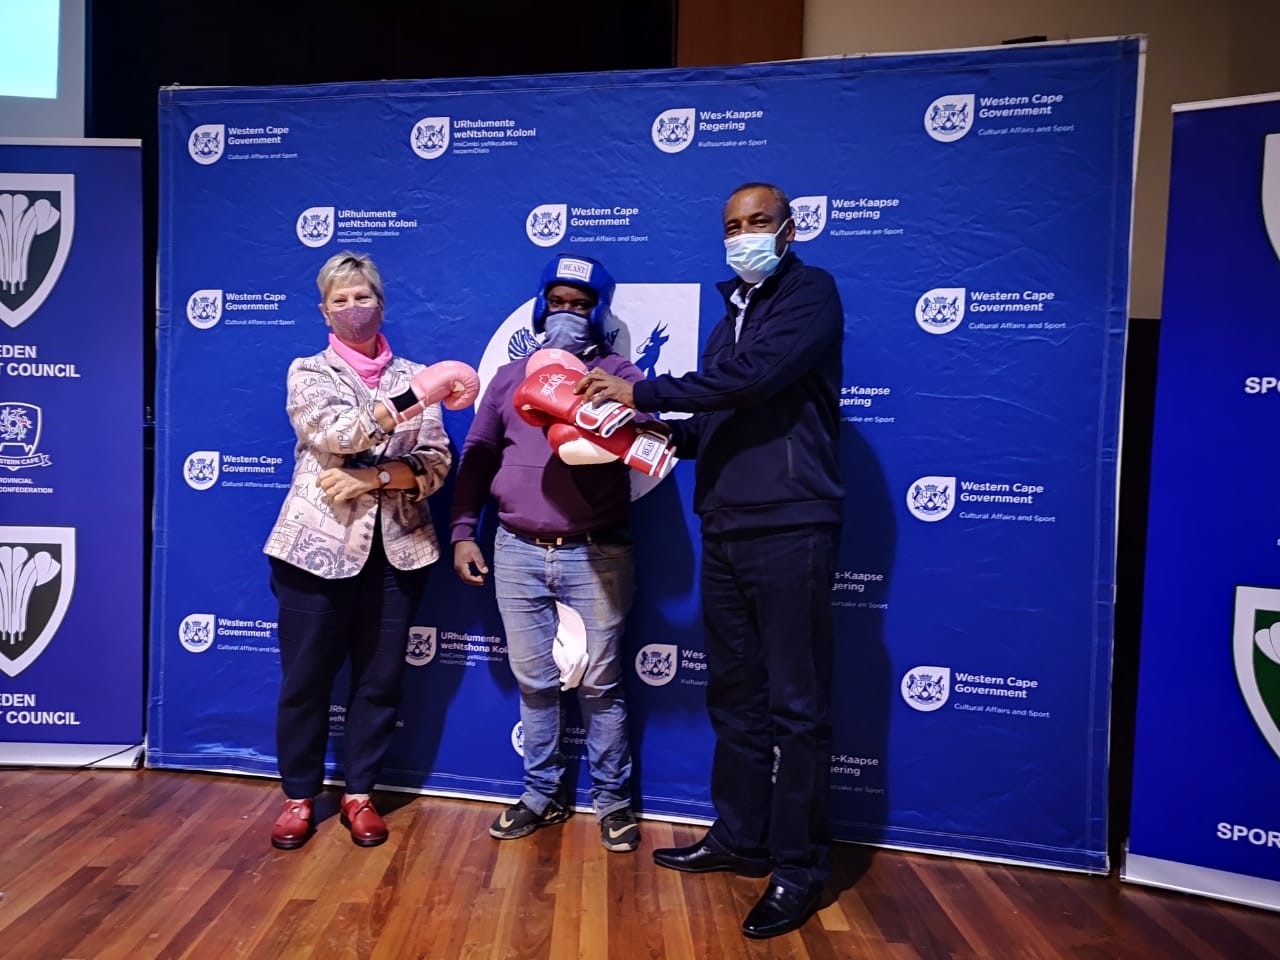 Minister Marais also handed over equipment to some of the federations.